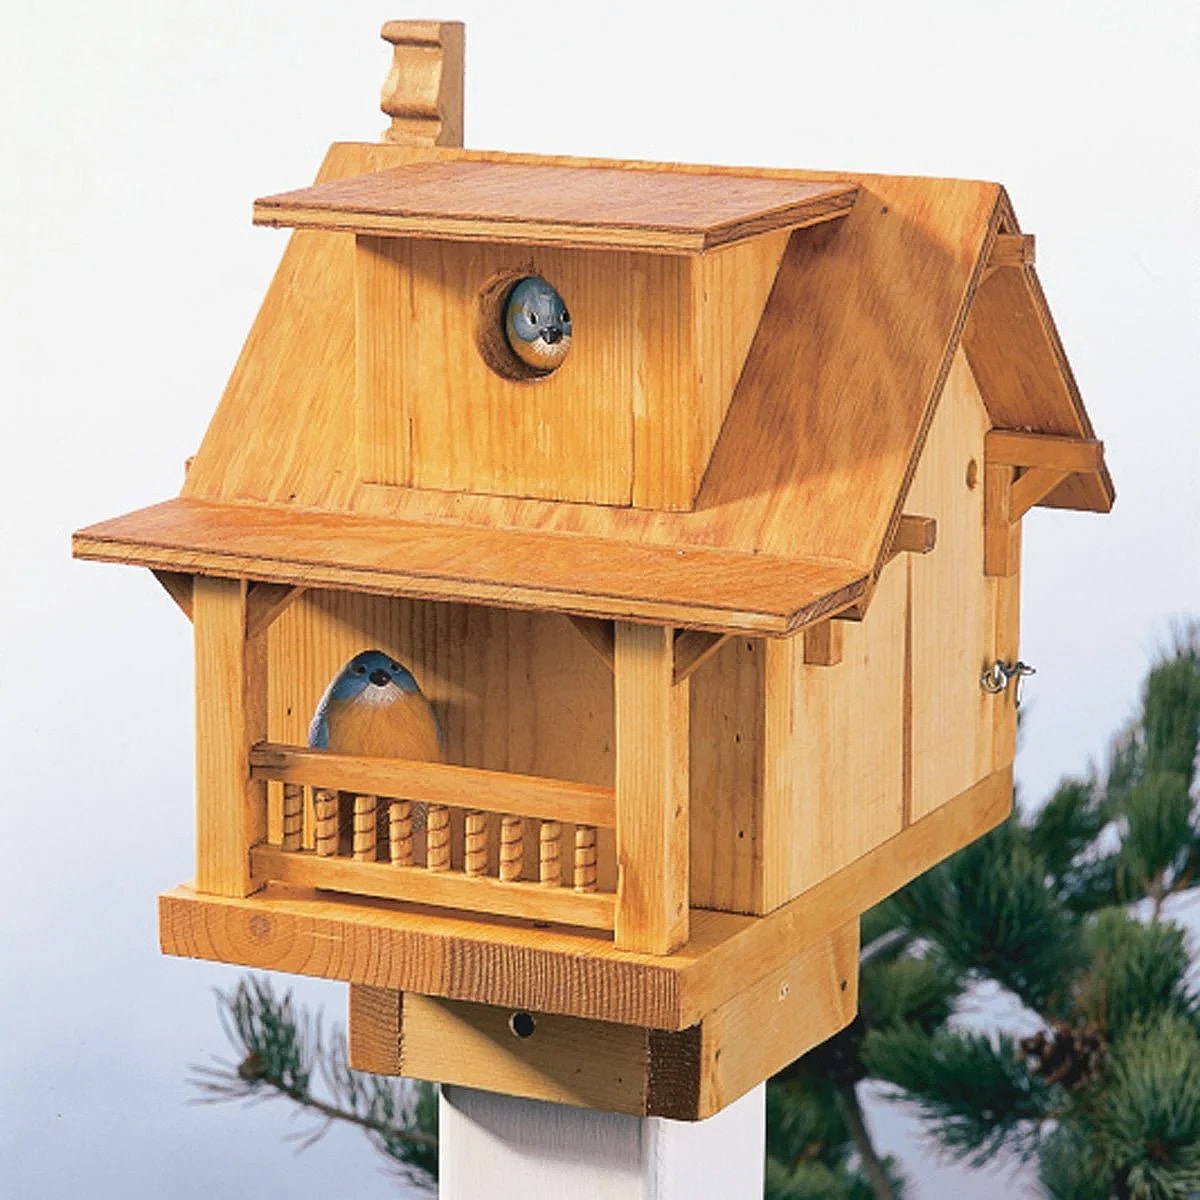 fun-to-build diy birdhouse made with simple tools